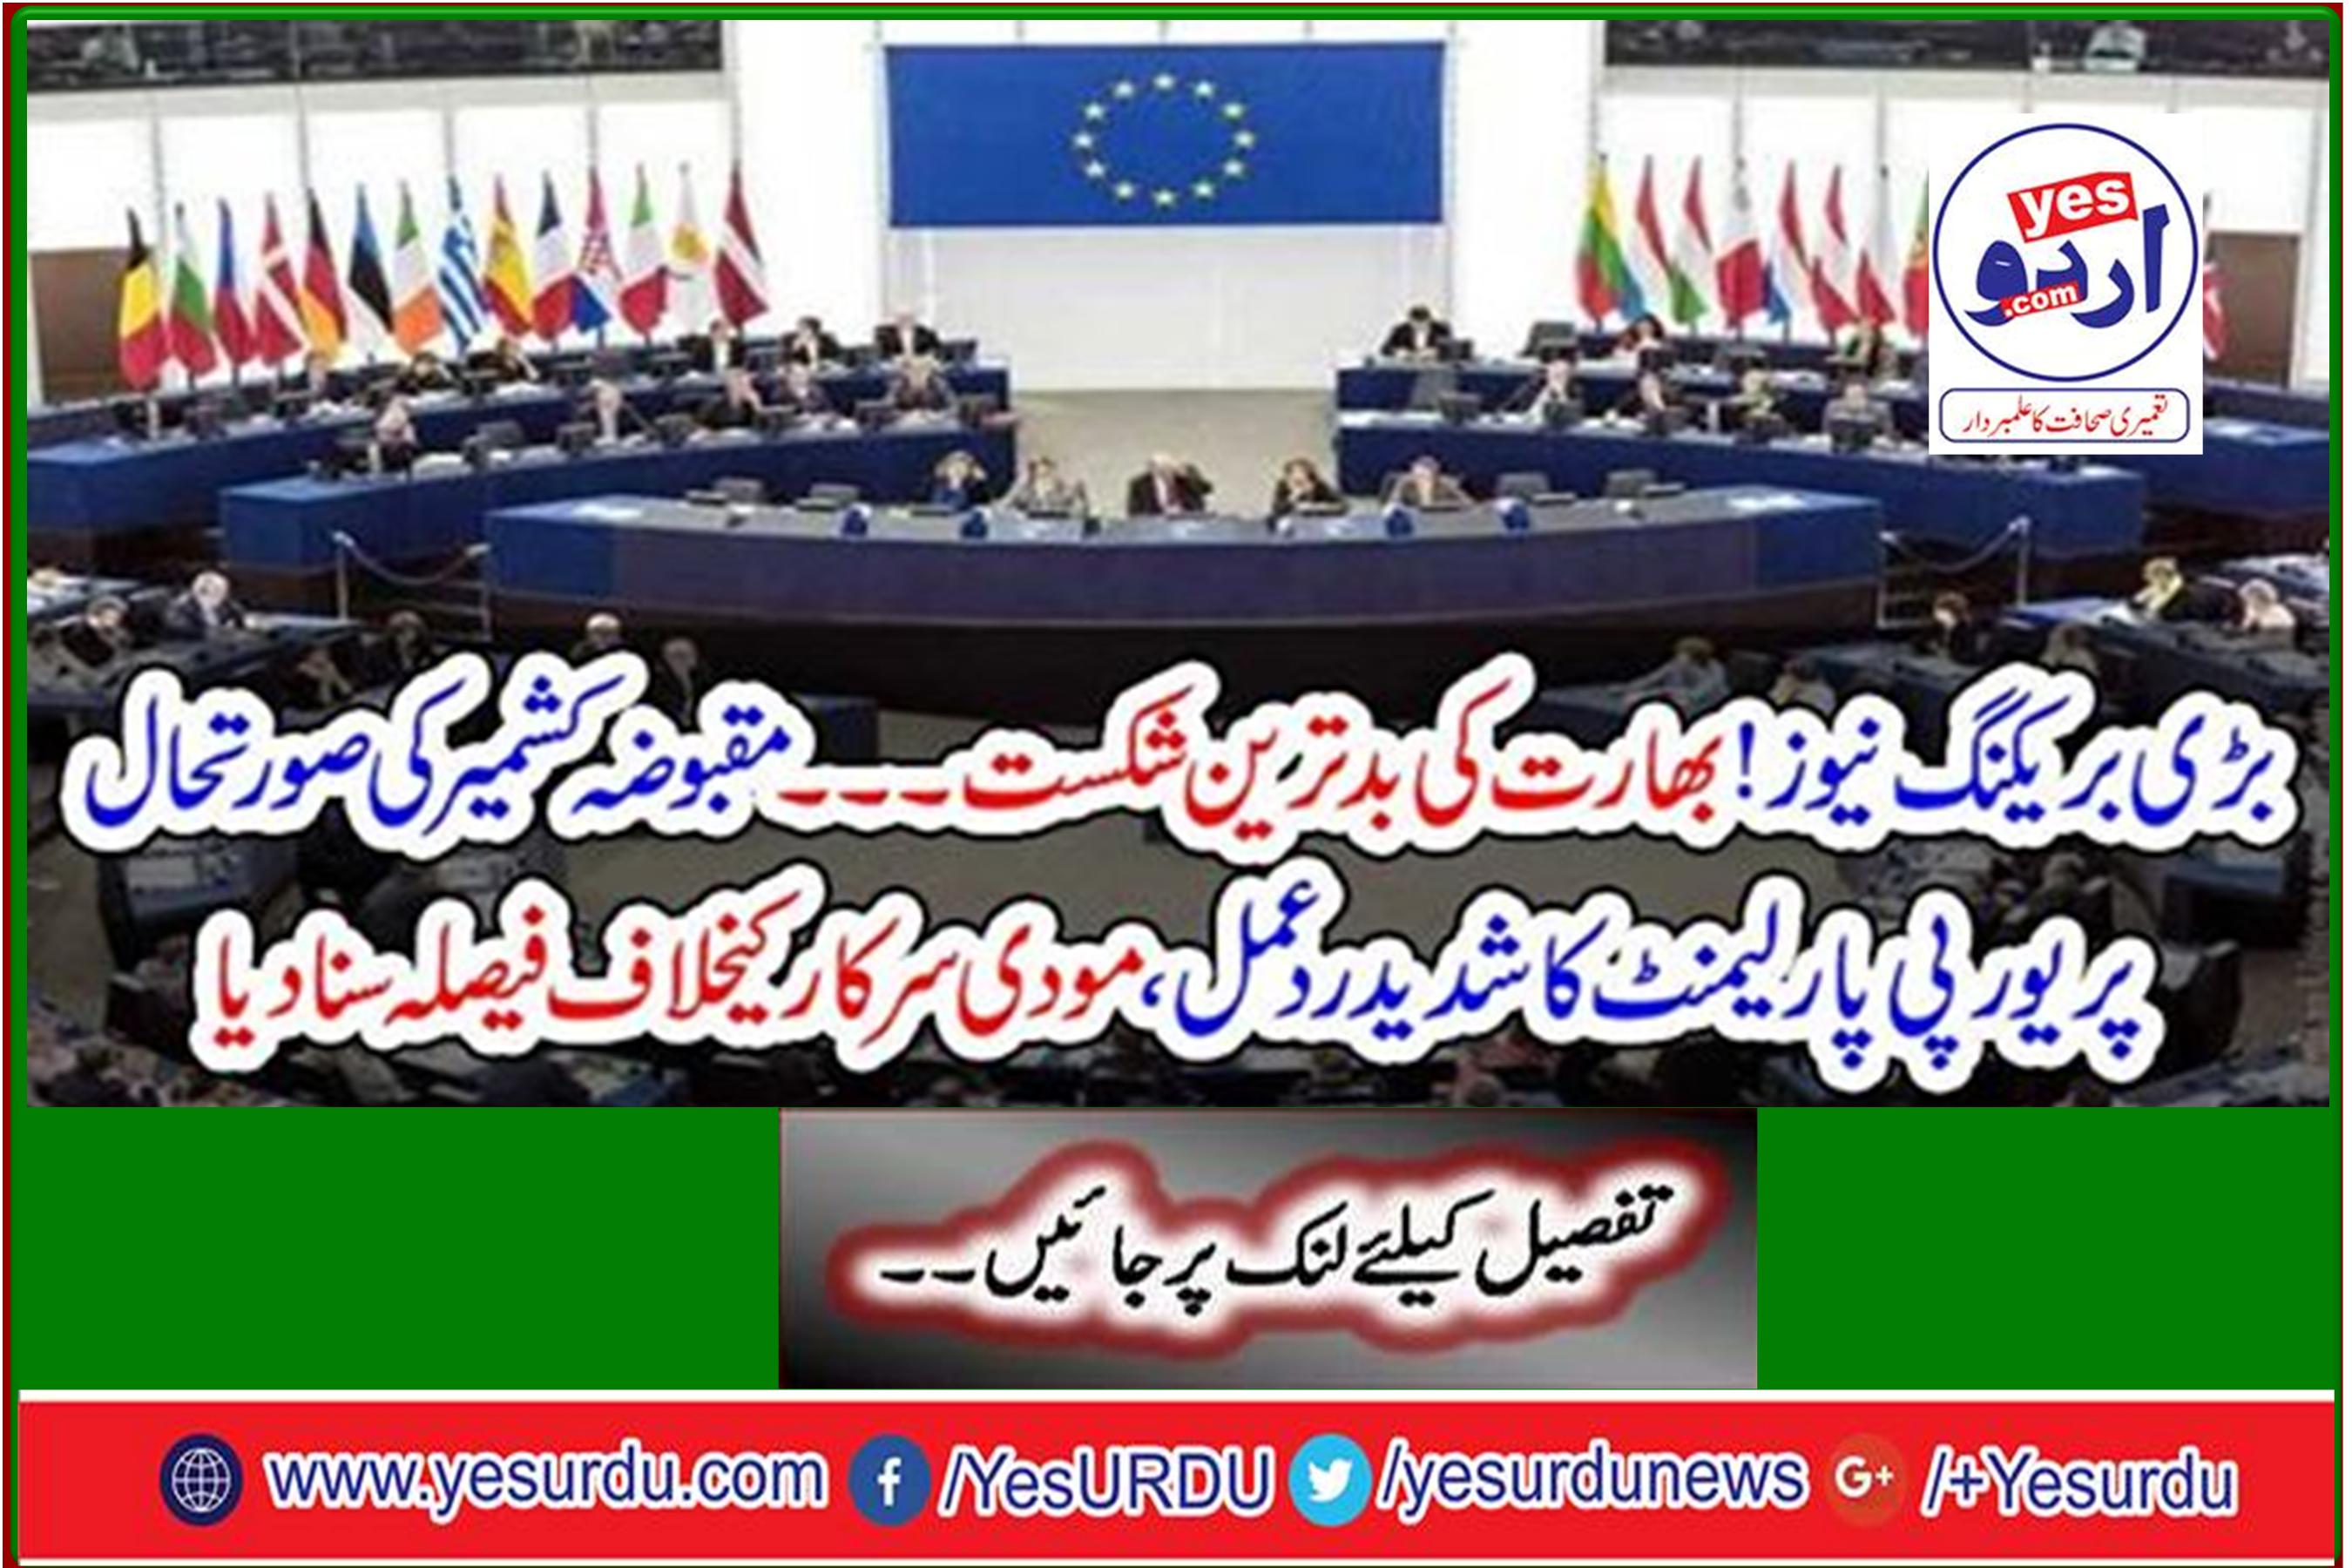 European Parliament reacts to the situation in occupied Kashmir, verdict against Modi government